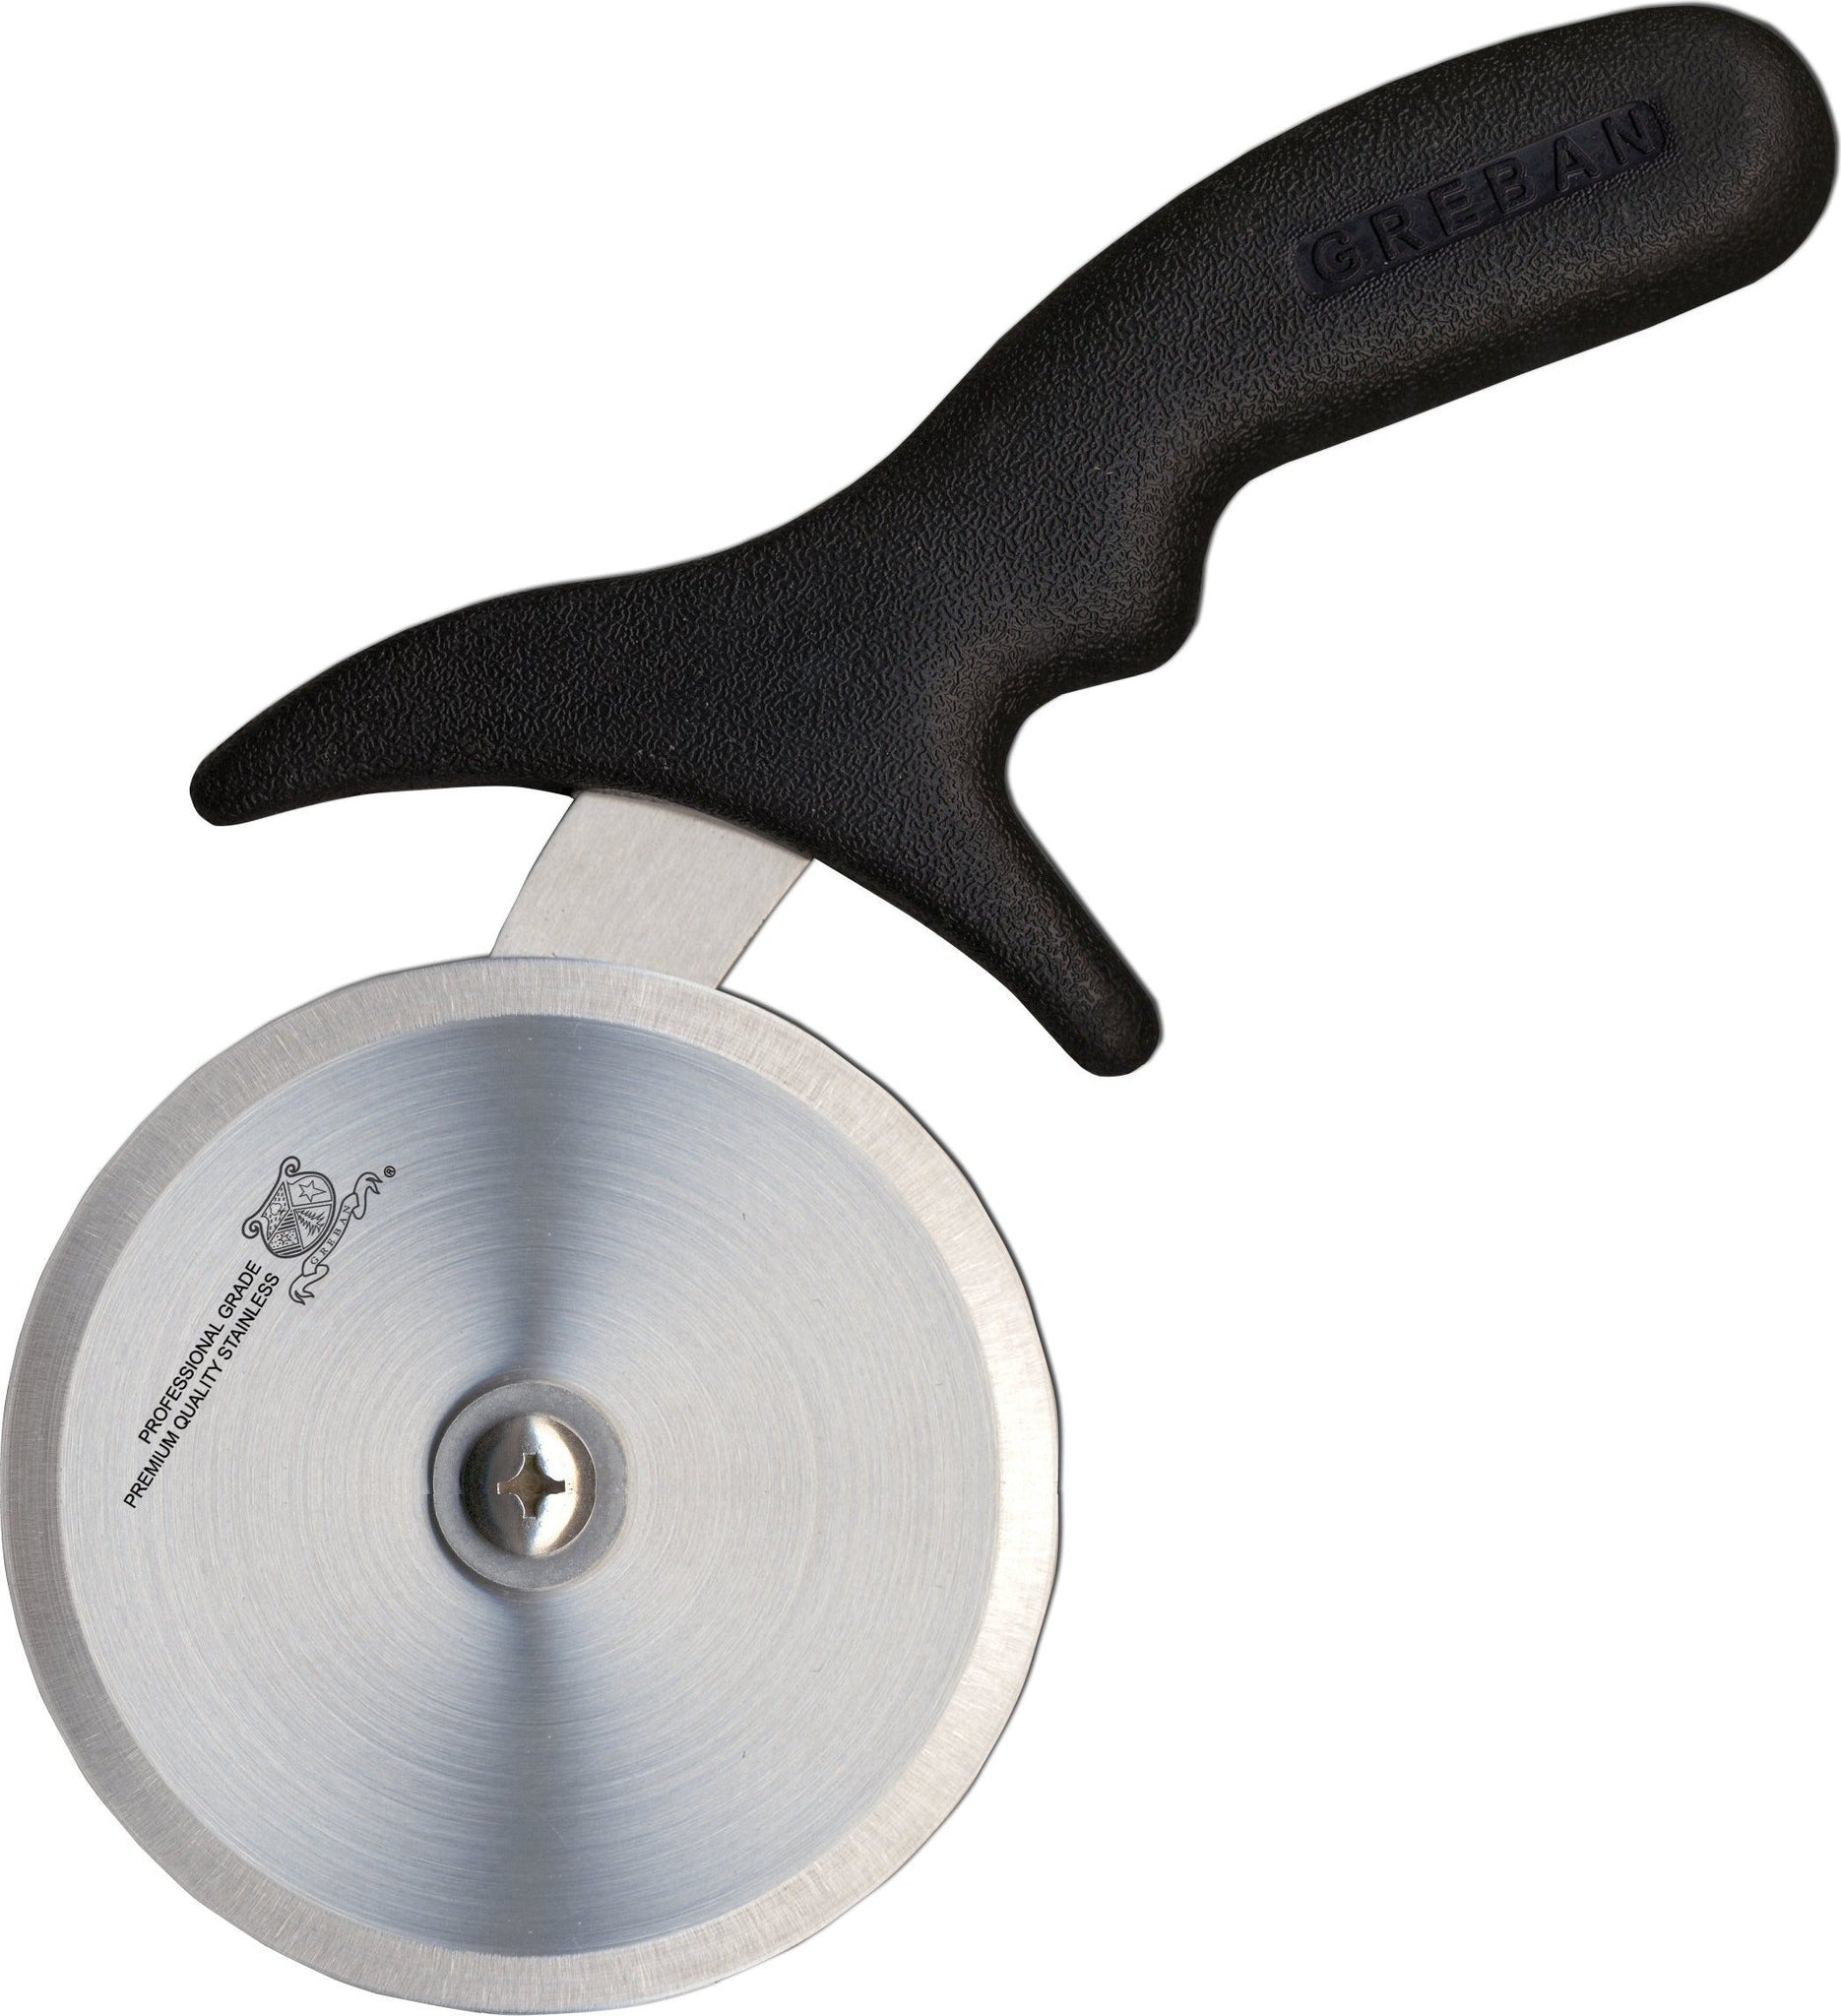 Omcan - 4” Pizza Cutter with Black Handle, 10/cs - 12794